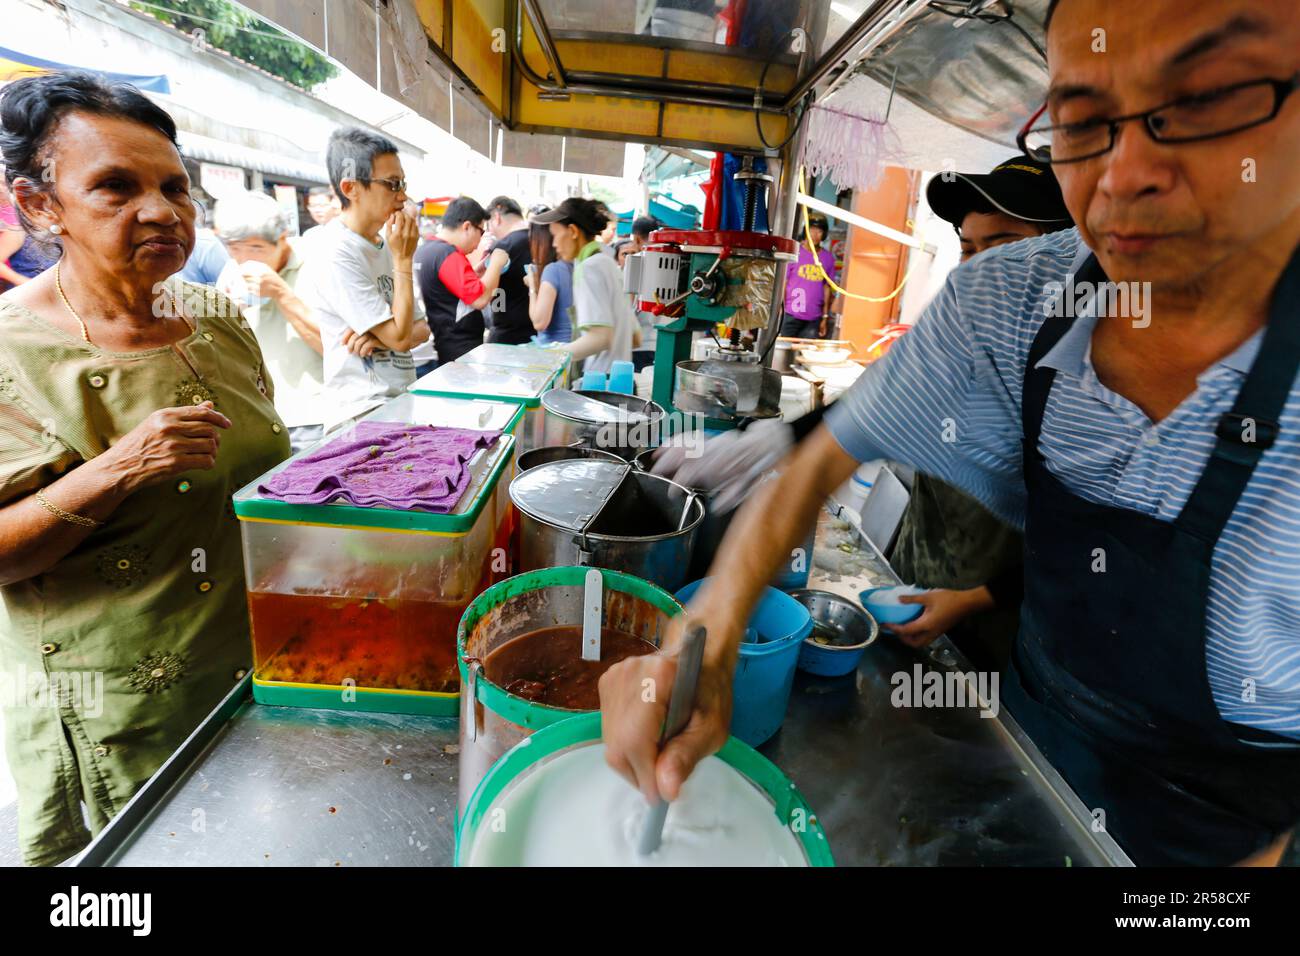 Georgetown, Penang, Malaysia - July 18, 2014: Penang Road Famous Cendol is a local foodie landmark in Georgetown, Penang, Malaysia. Cendol is an iced Stock Photo